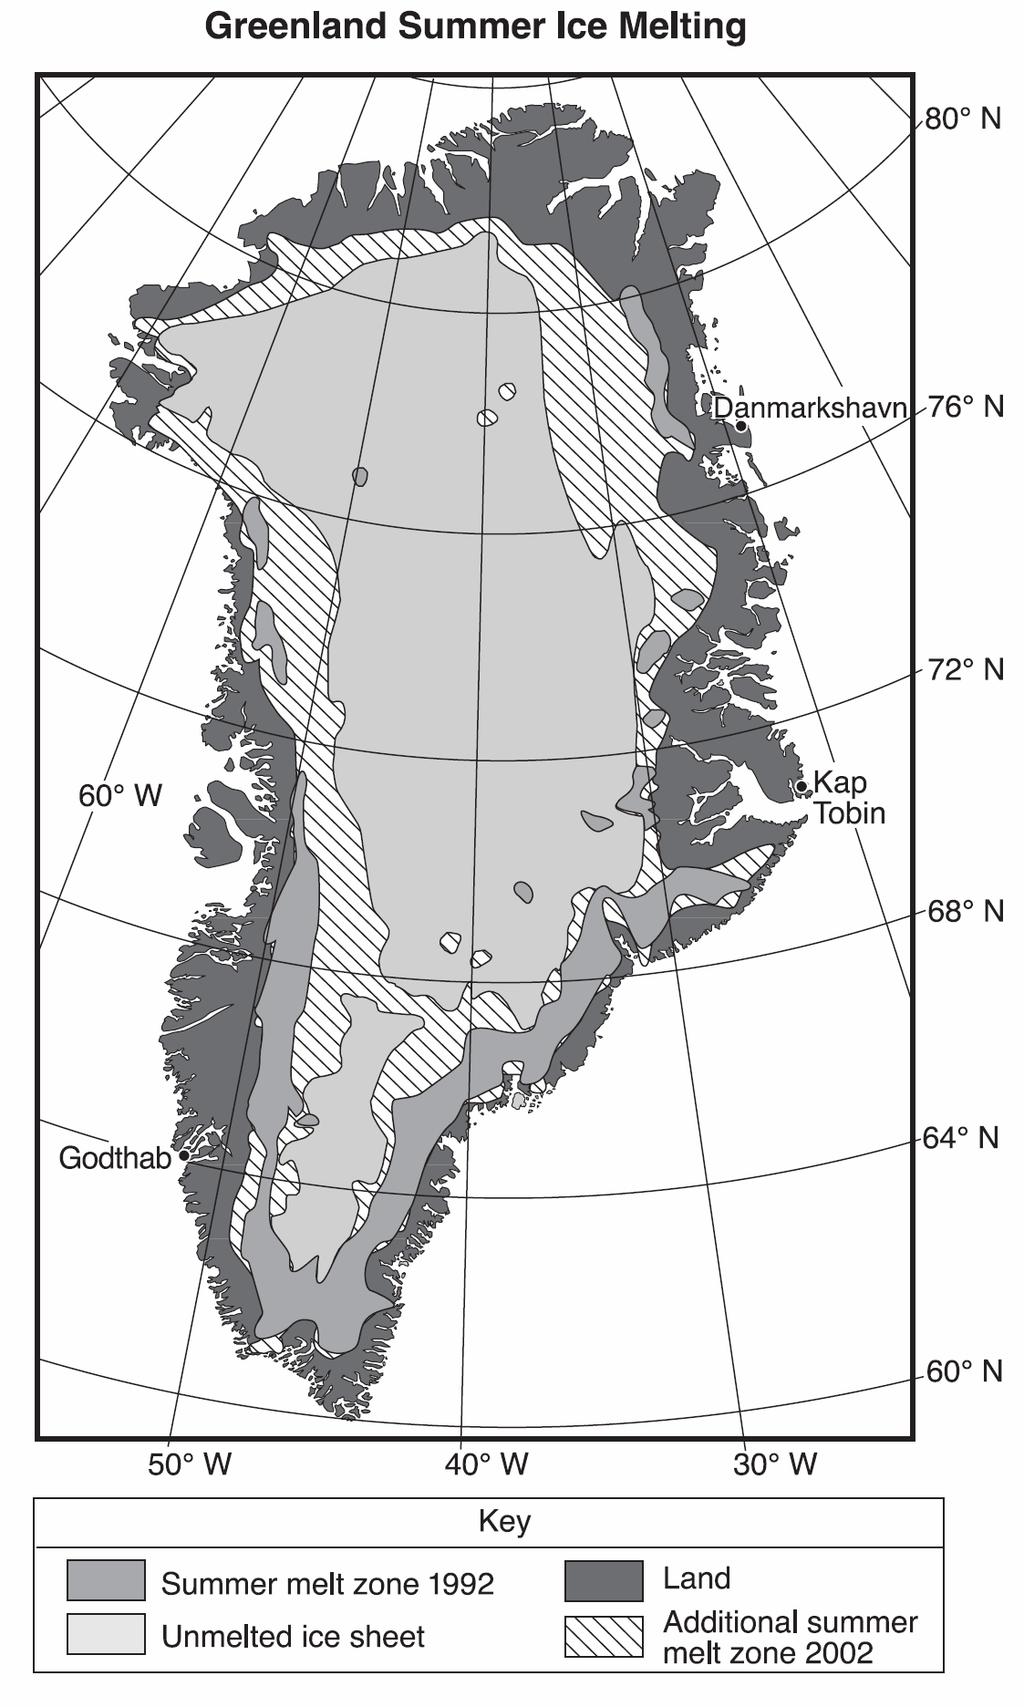 7) Base your answer to the following question on the following map and passage. The map shows the extent of summer ice-melt zones on Greenland in 1992 and 2002.